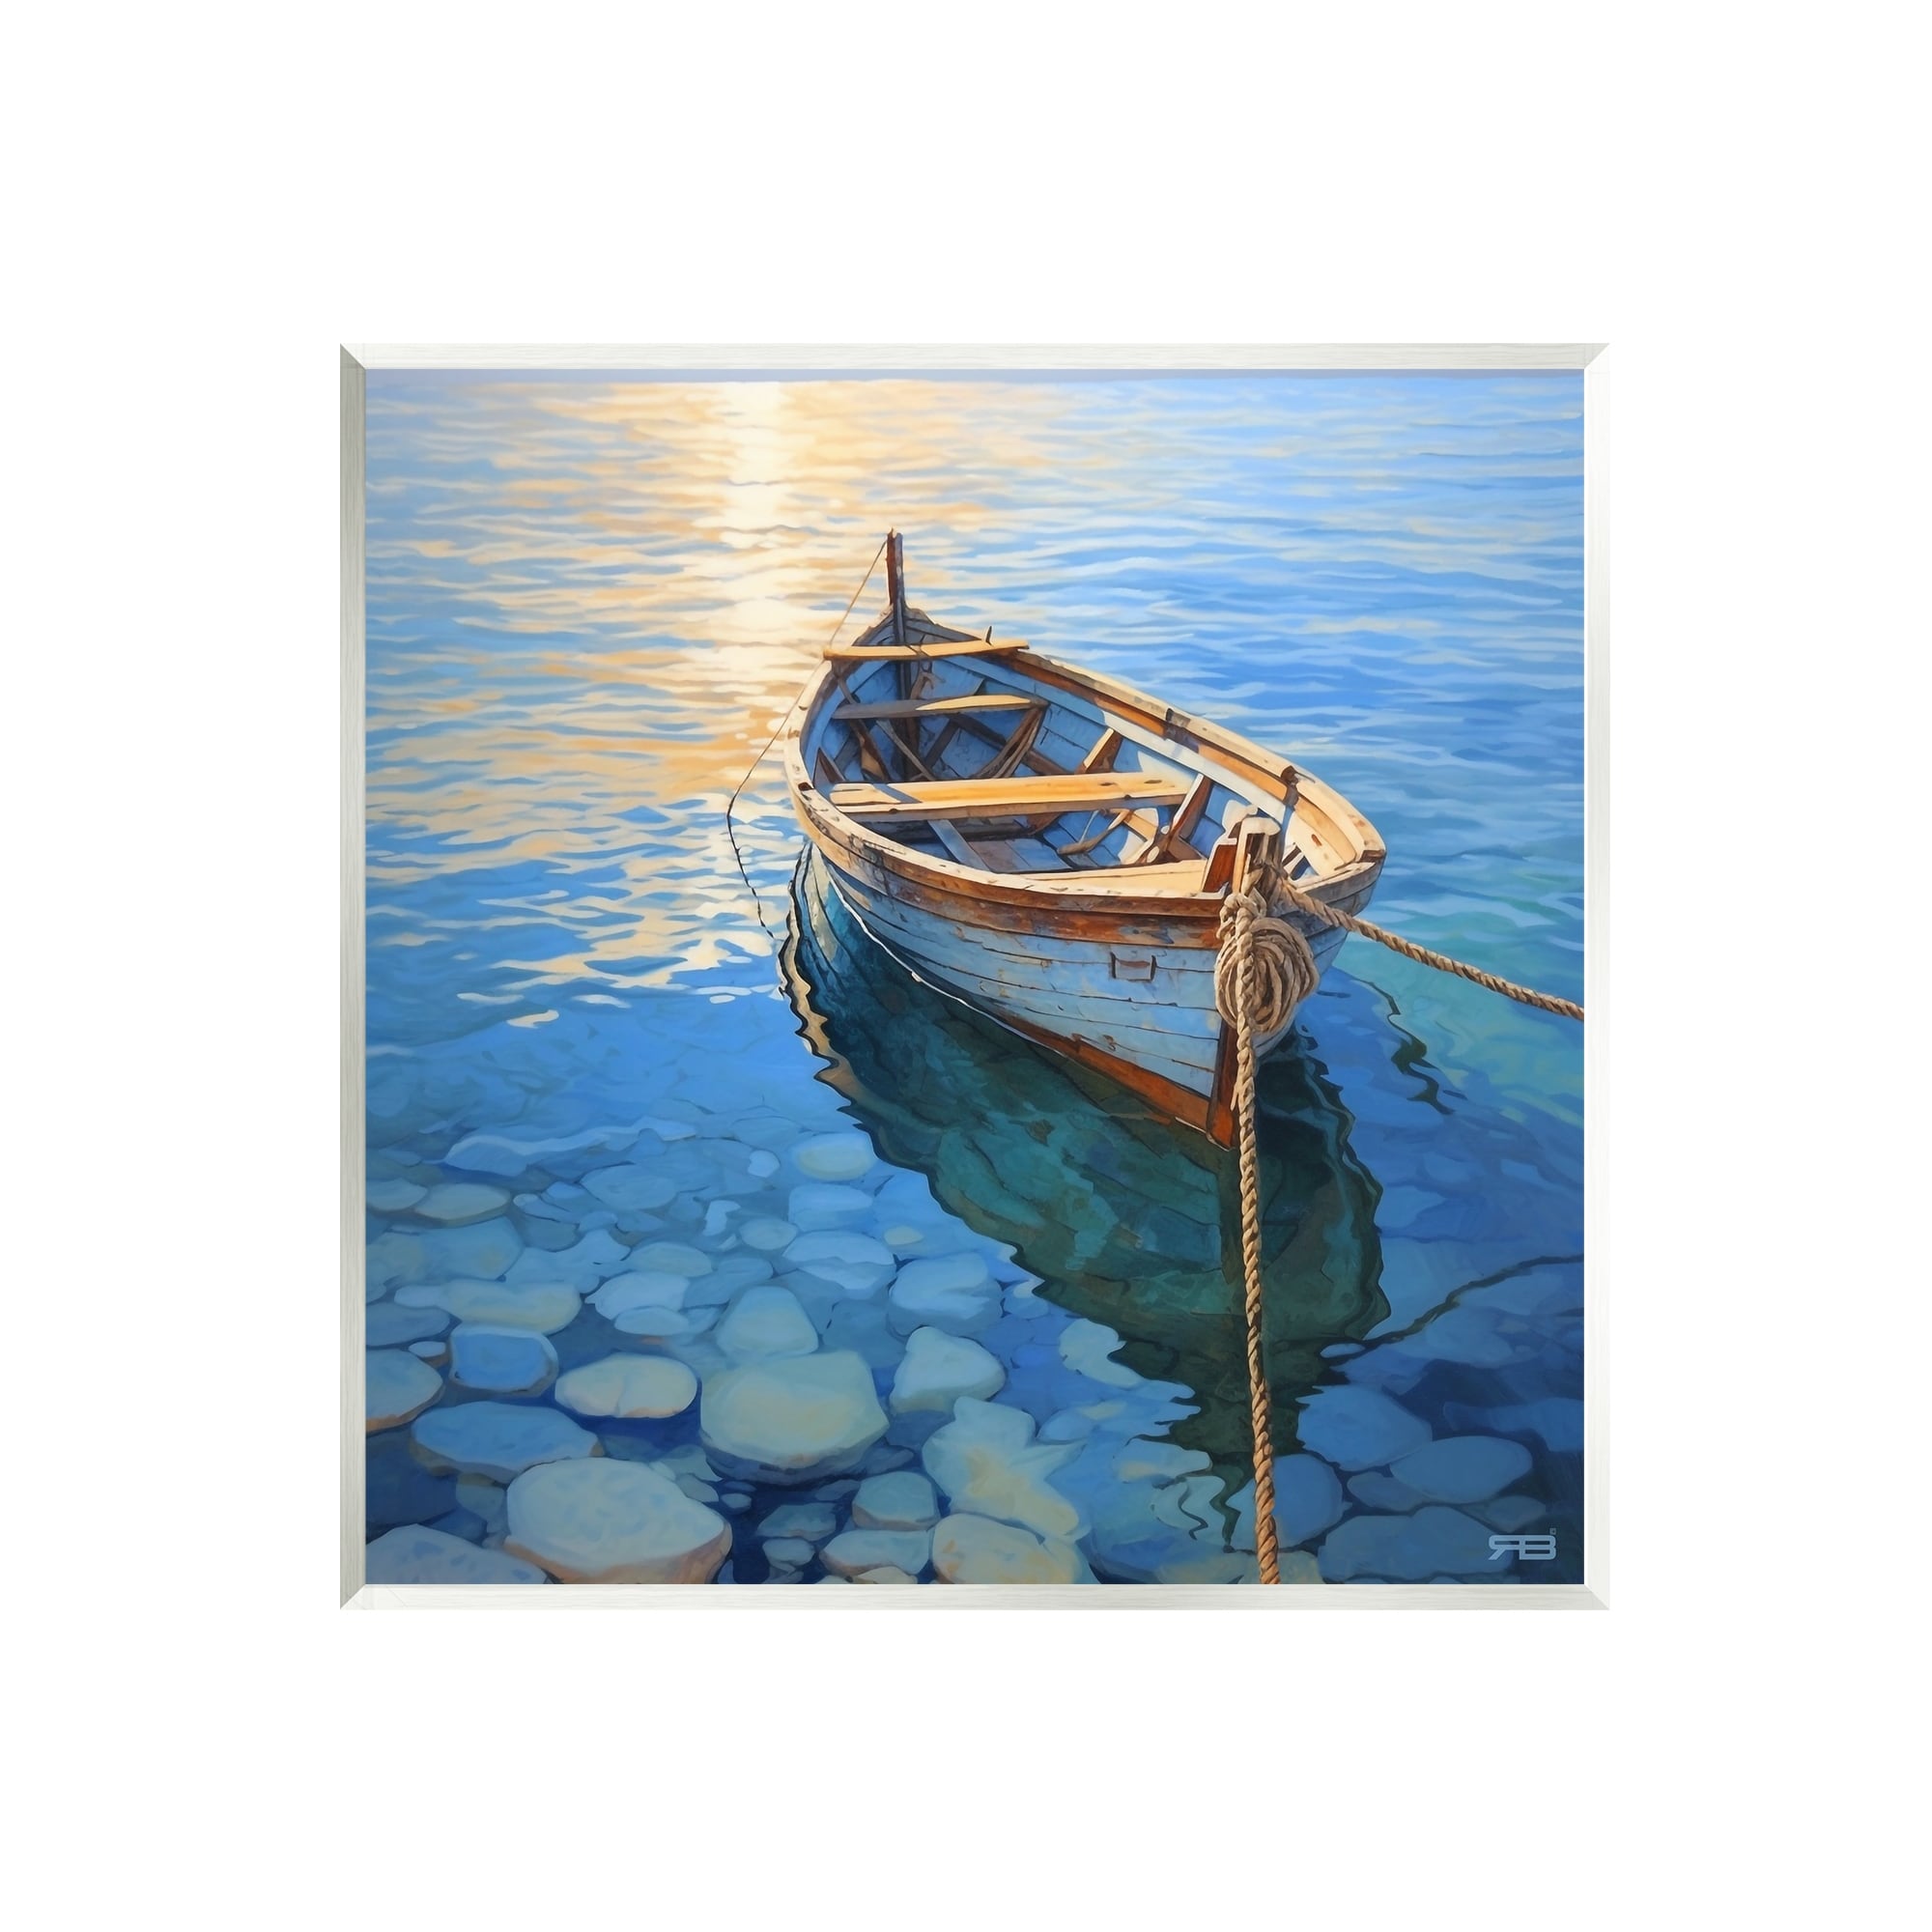 Stupell Rowboat & Pebbled Shore Wall Plaque Art Design by RB - On Sale -  Bed Bath & Beyond - 40015287